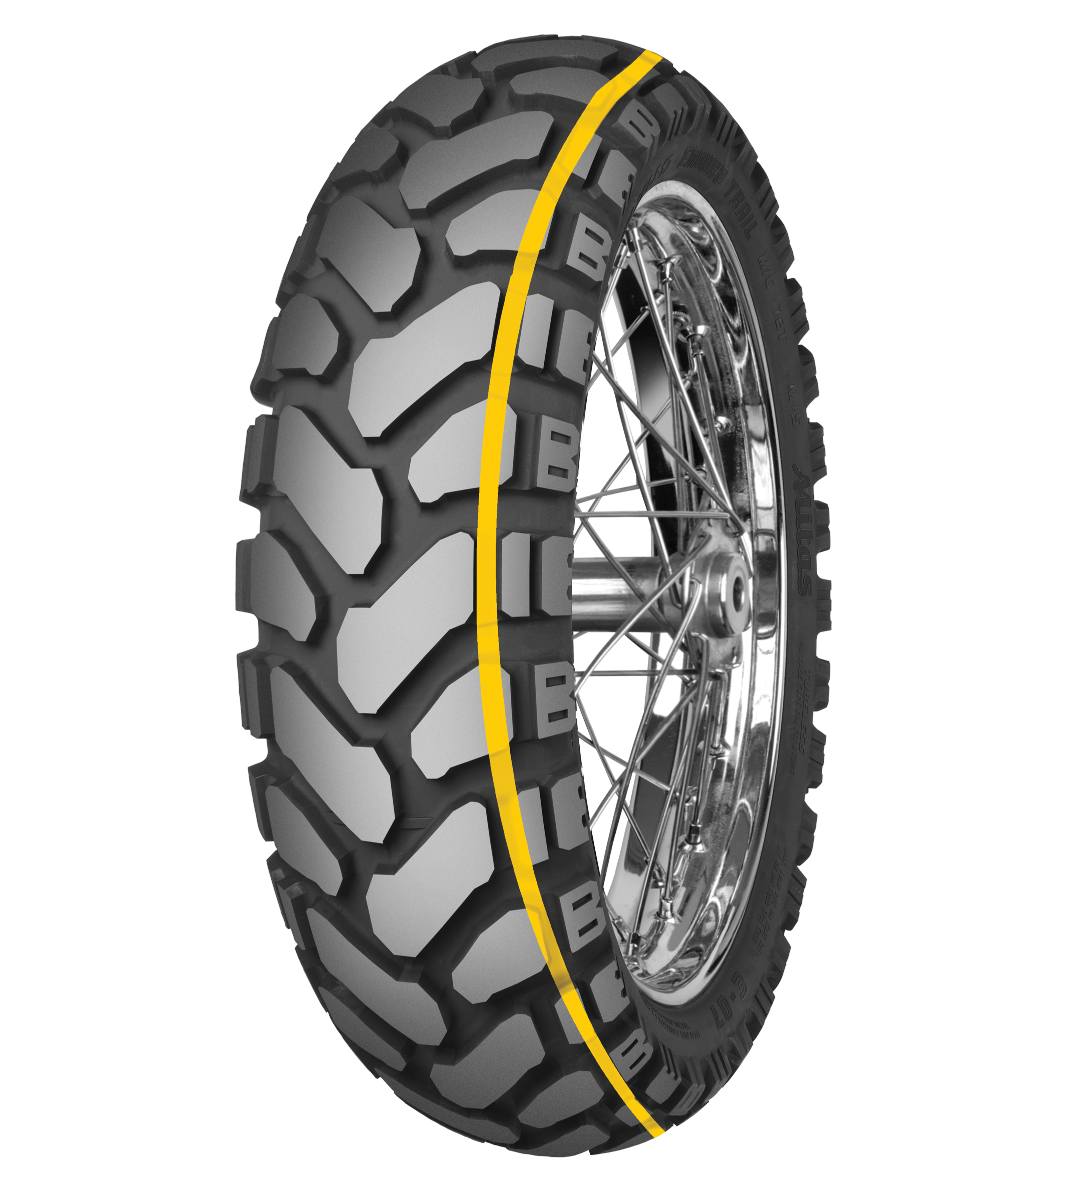 Mitas E-07+ ENDURO TRAIL 170/60B17 Trail ON Trail DAKAR 72T Yellow Tubeless Rear Tire, 224030, 170/60B17, Adventure Touring, E Series, E-07+ Enduro Trail, Rear, Trail, Trail ON, Tires - Imported and distributed in North &amp; South America by Lindeco Genuine Powersports - Premier Powersports Equipment and Accessories for Motorcycle Enthusiasts, Professional Riders and Dealers.